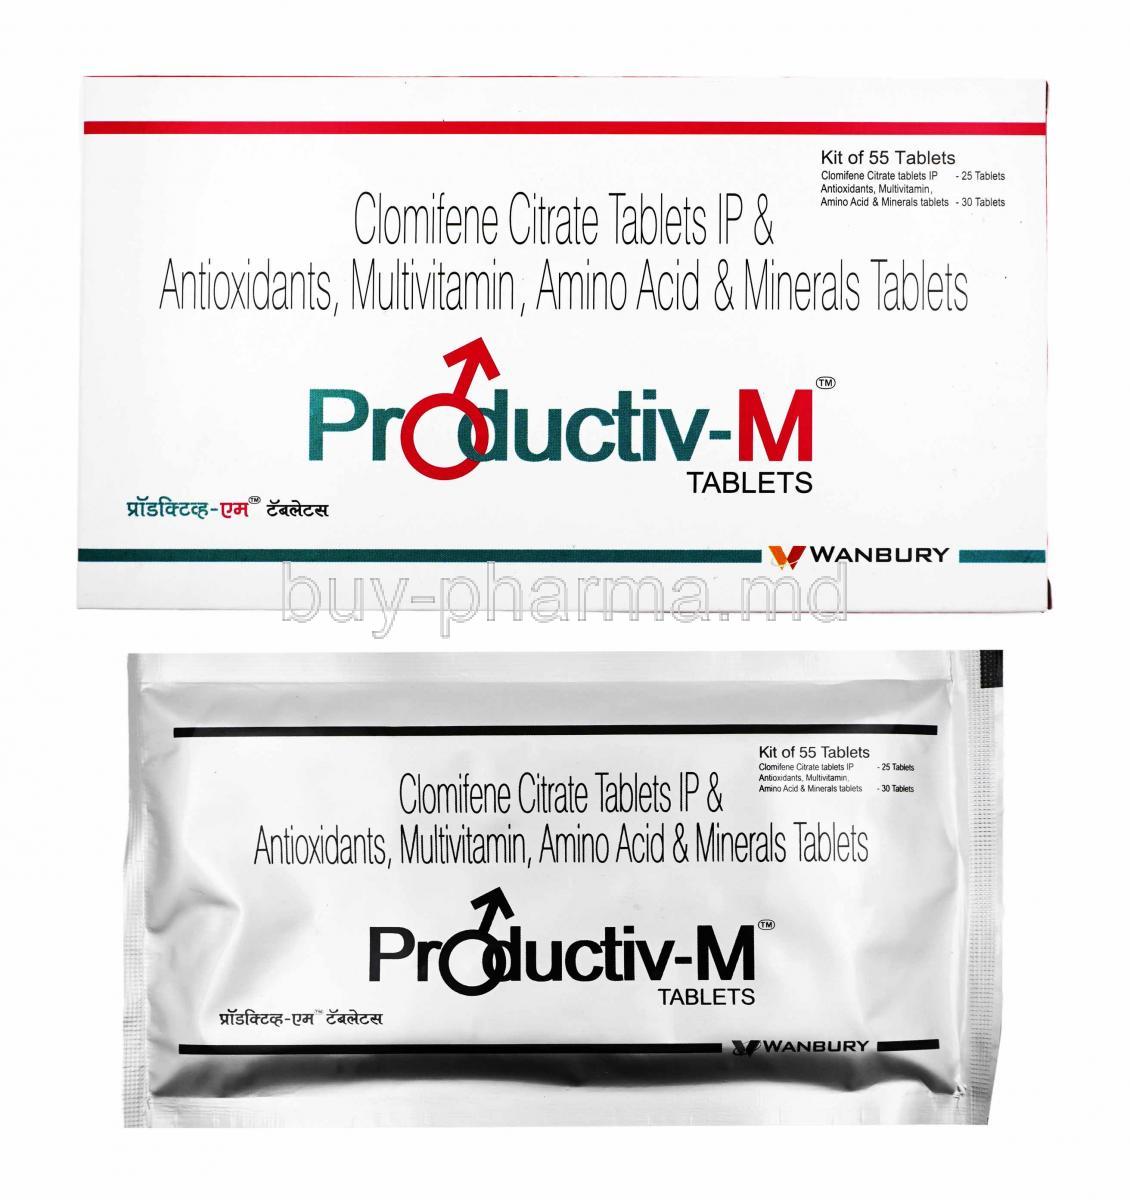 Productiv-M, Clomifene, Pyridoxine, Zinc and Coenzyme Q10 box and tablets